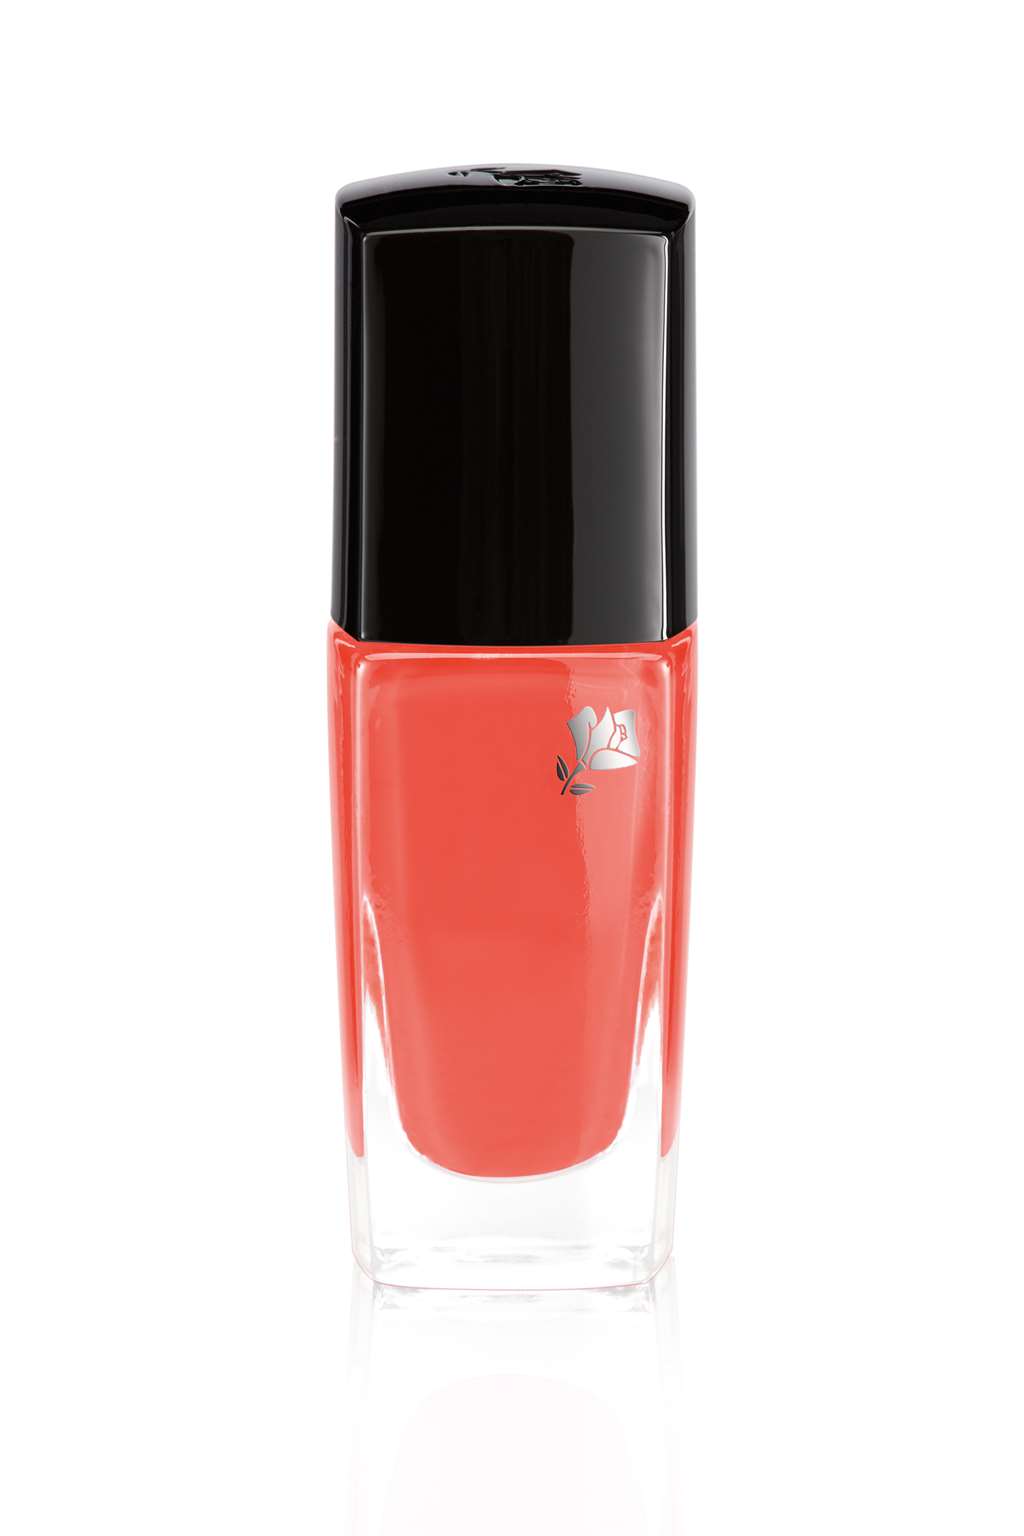 vernis-in-love-shade-152-corail-rouge